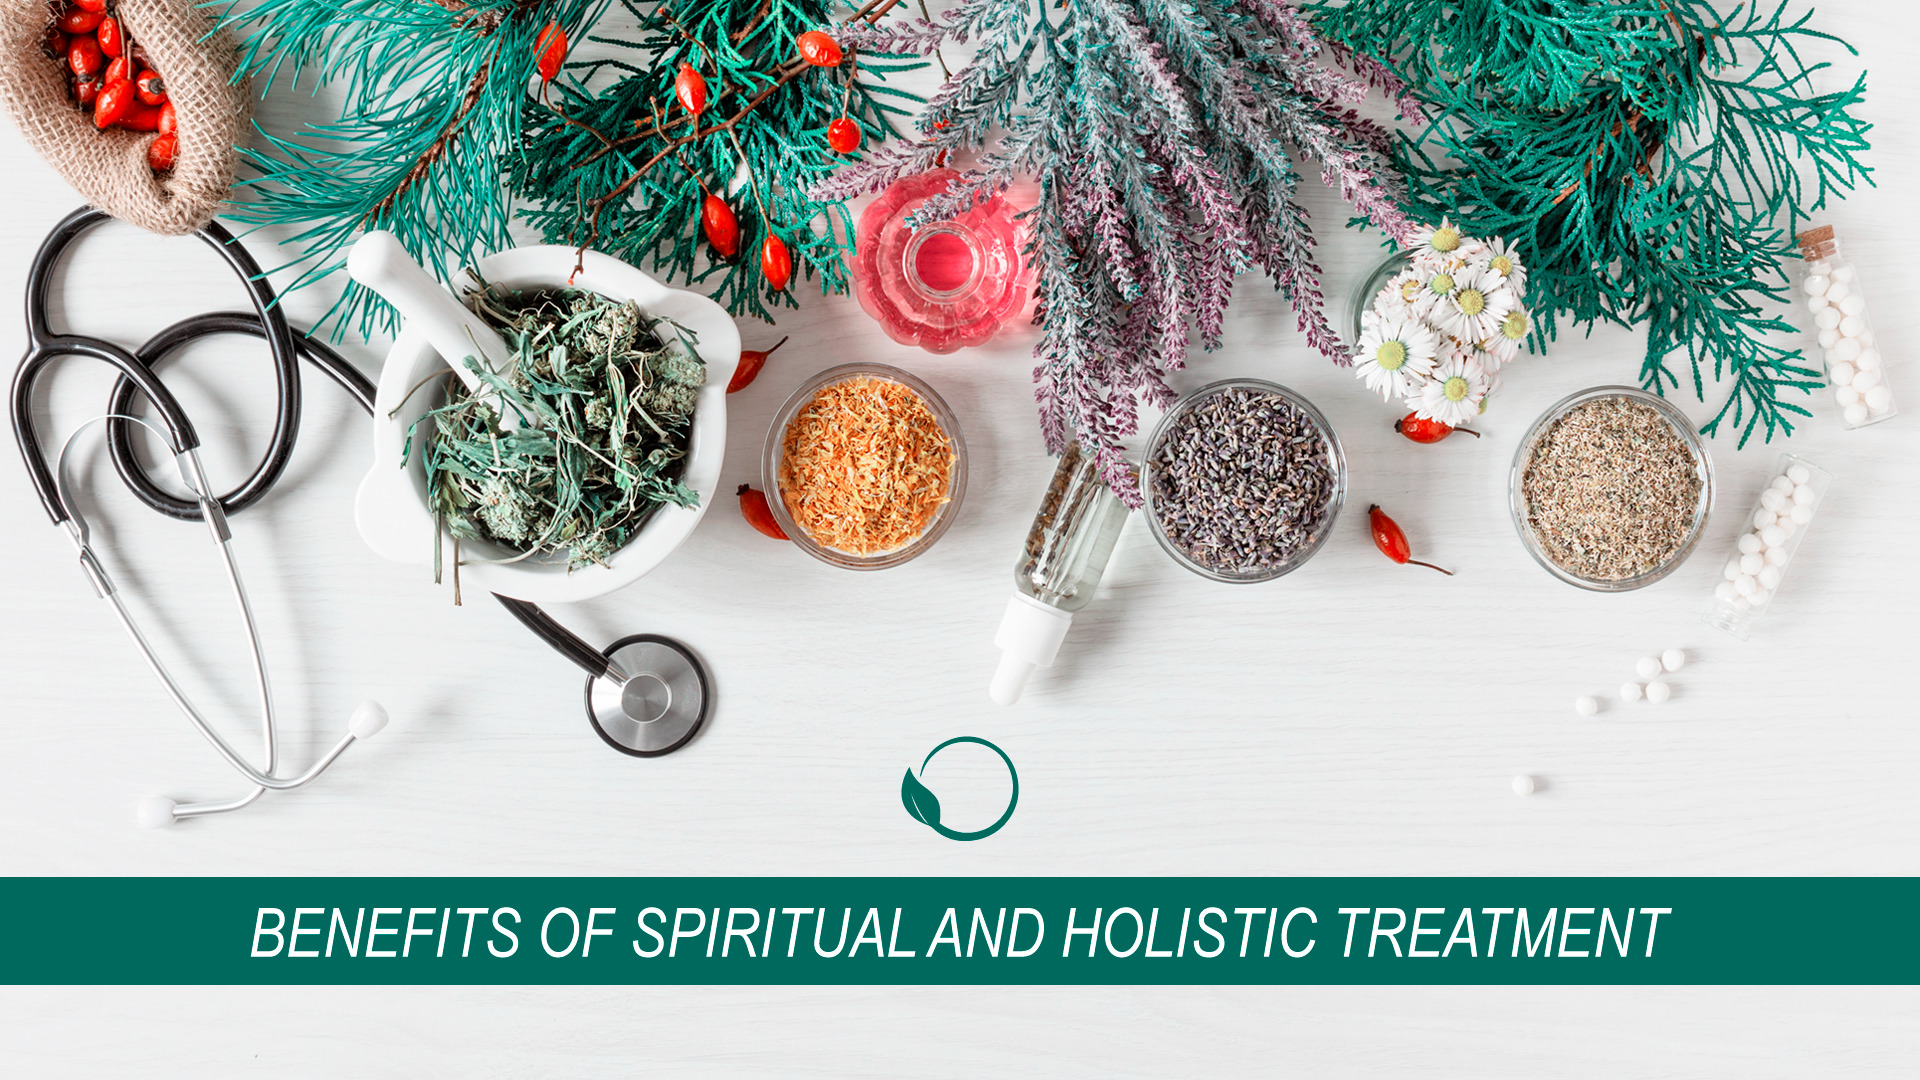 Spiritual and holistic treatment options aim to impact more of a person than simply their physical body.